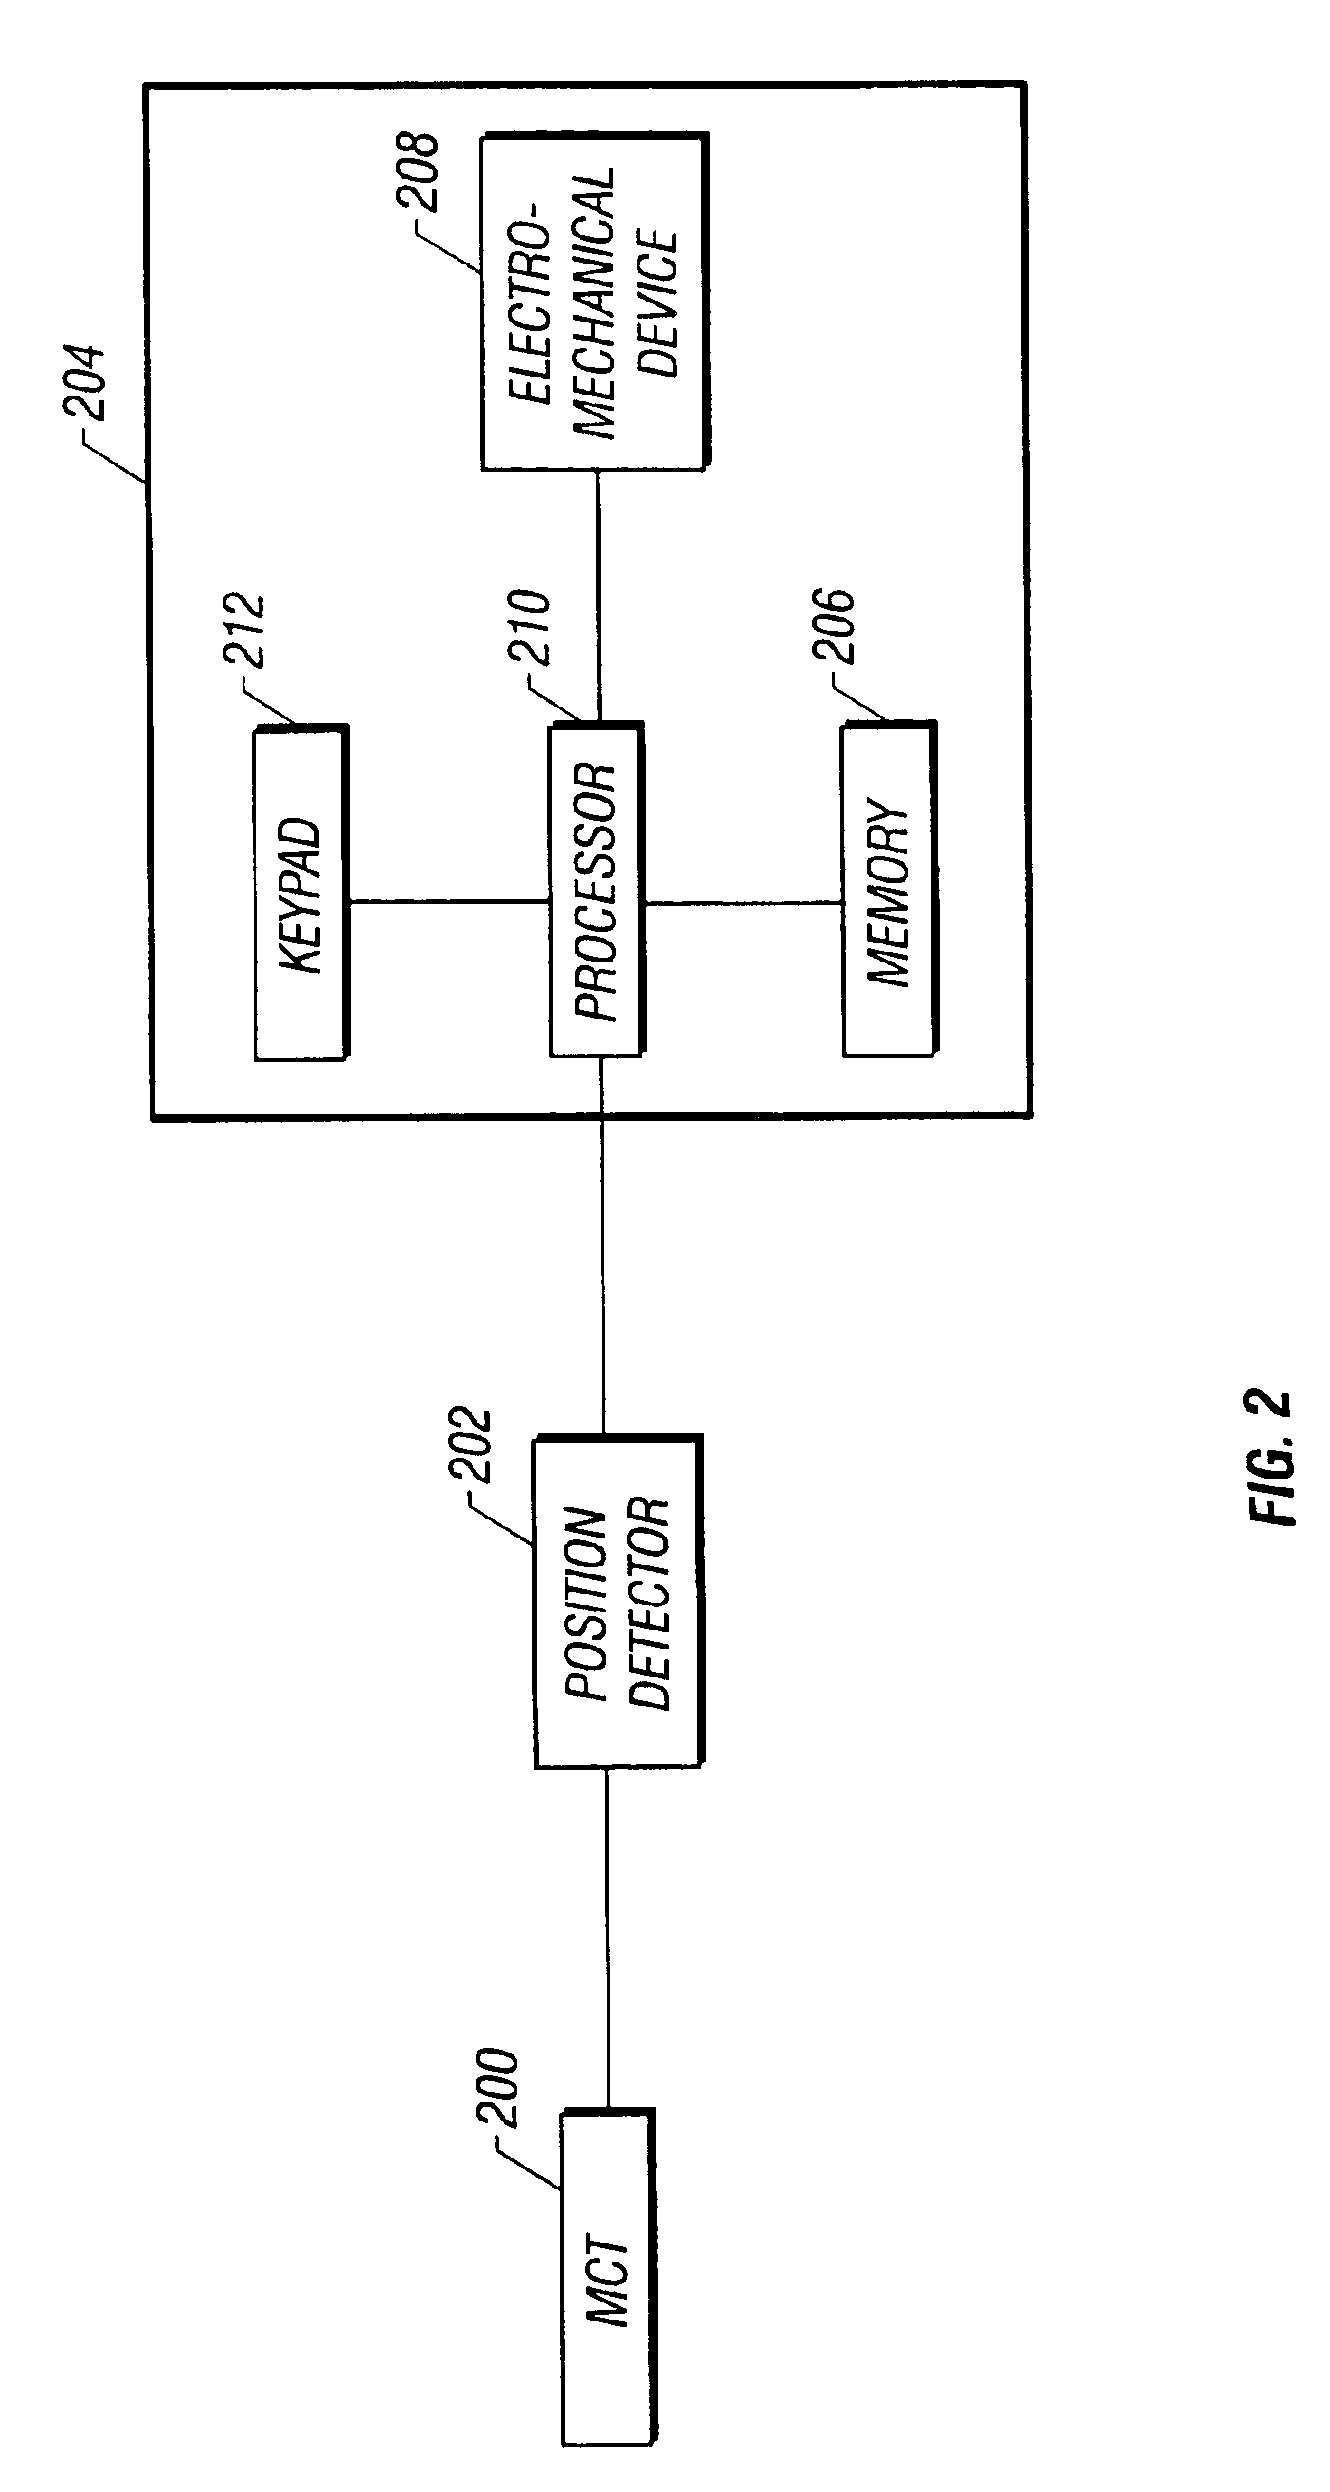 Method and apparatus for providing a proof of delivery verification for freight transportation systems